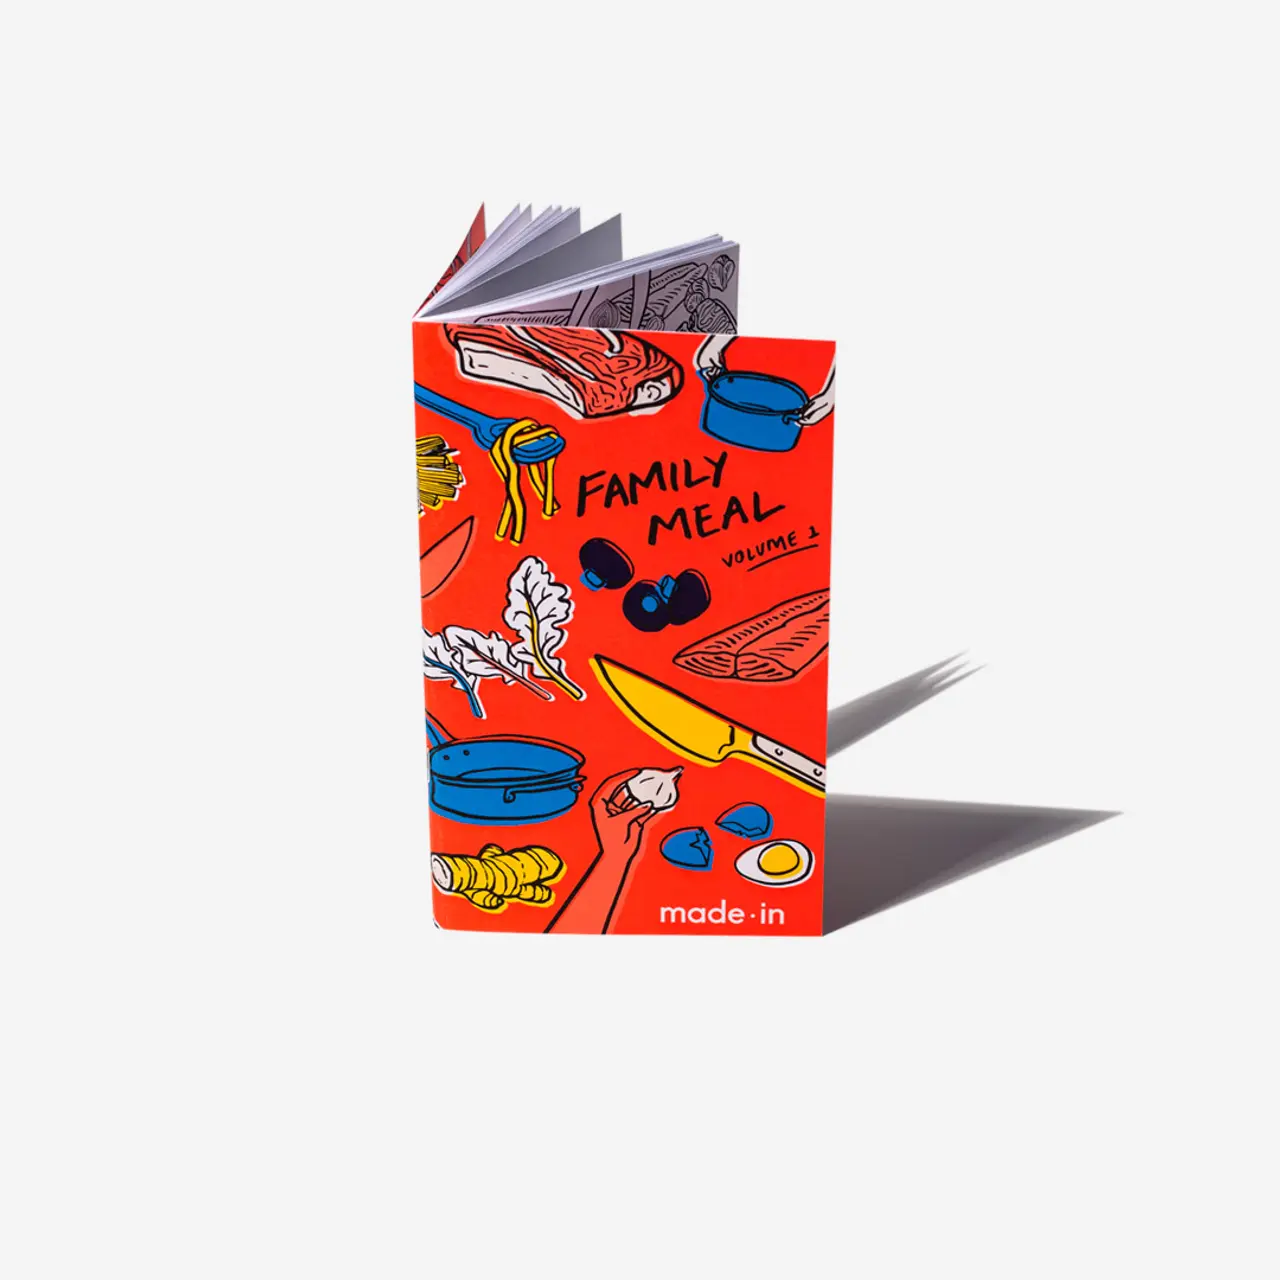 A vibrant red cookbook titled "FAMILY MEAL" with various food illustrations on its cover stands upright against a white background with a prominent shadow to the right.